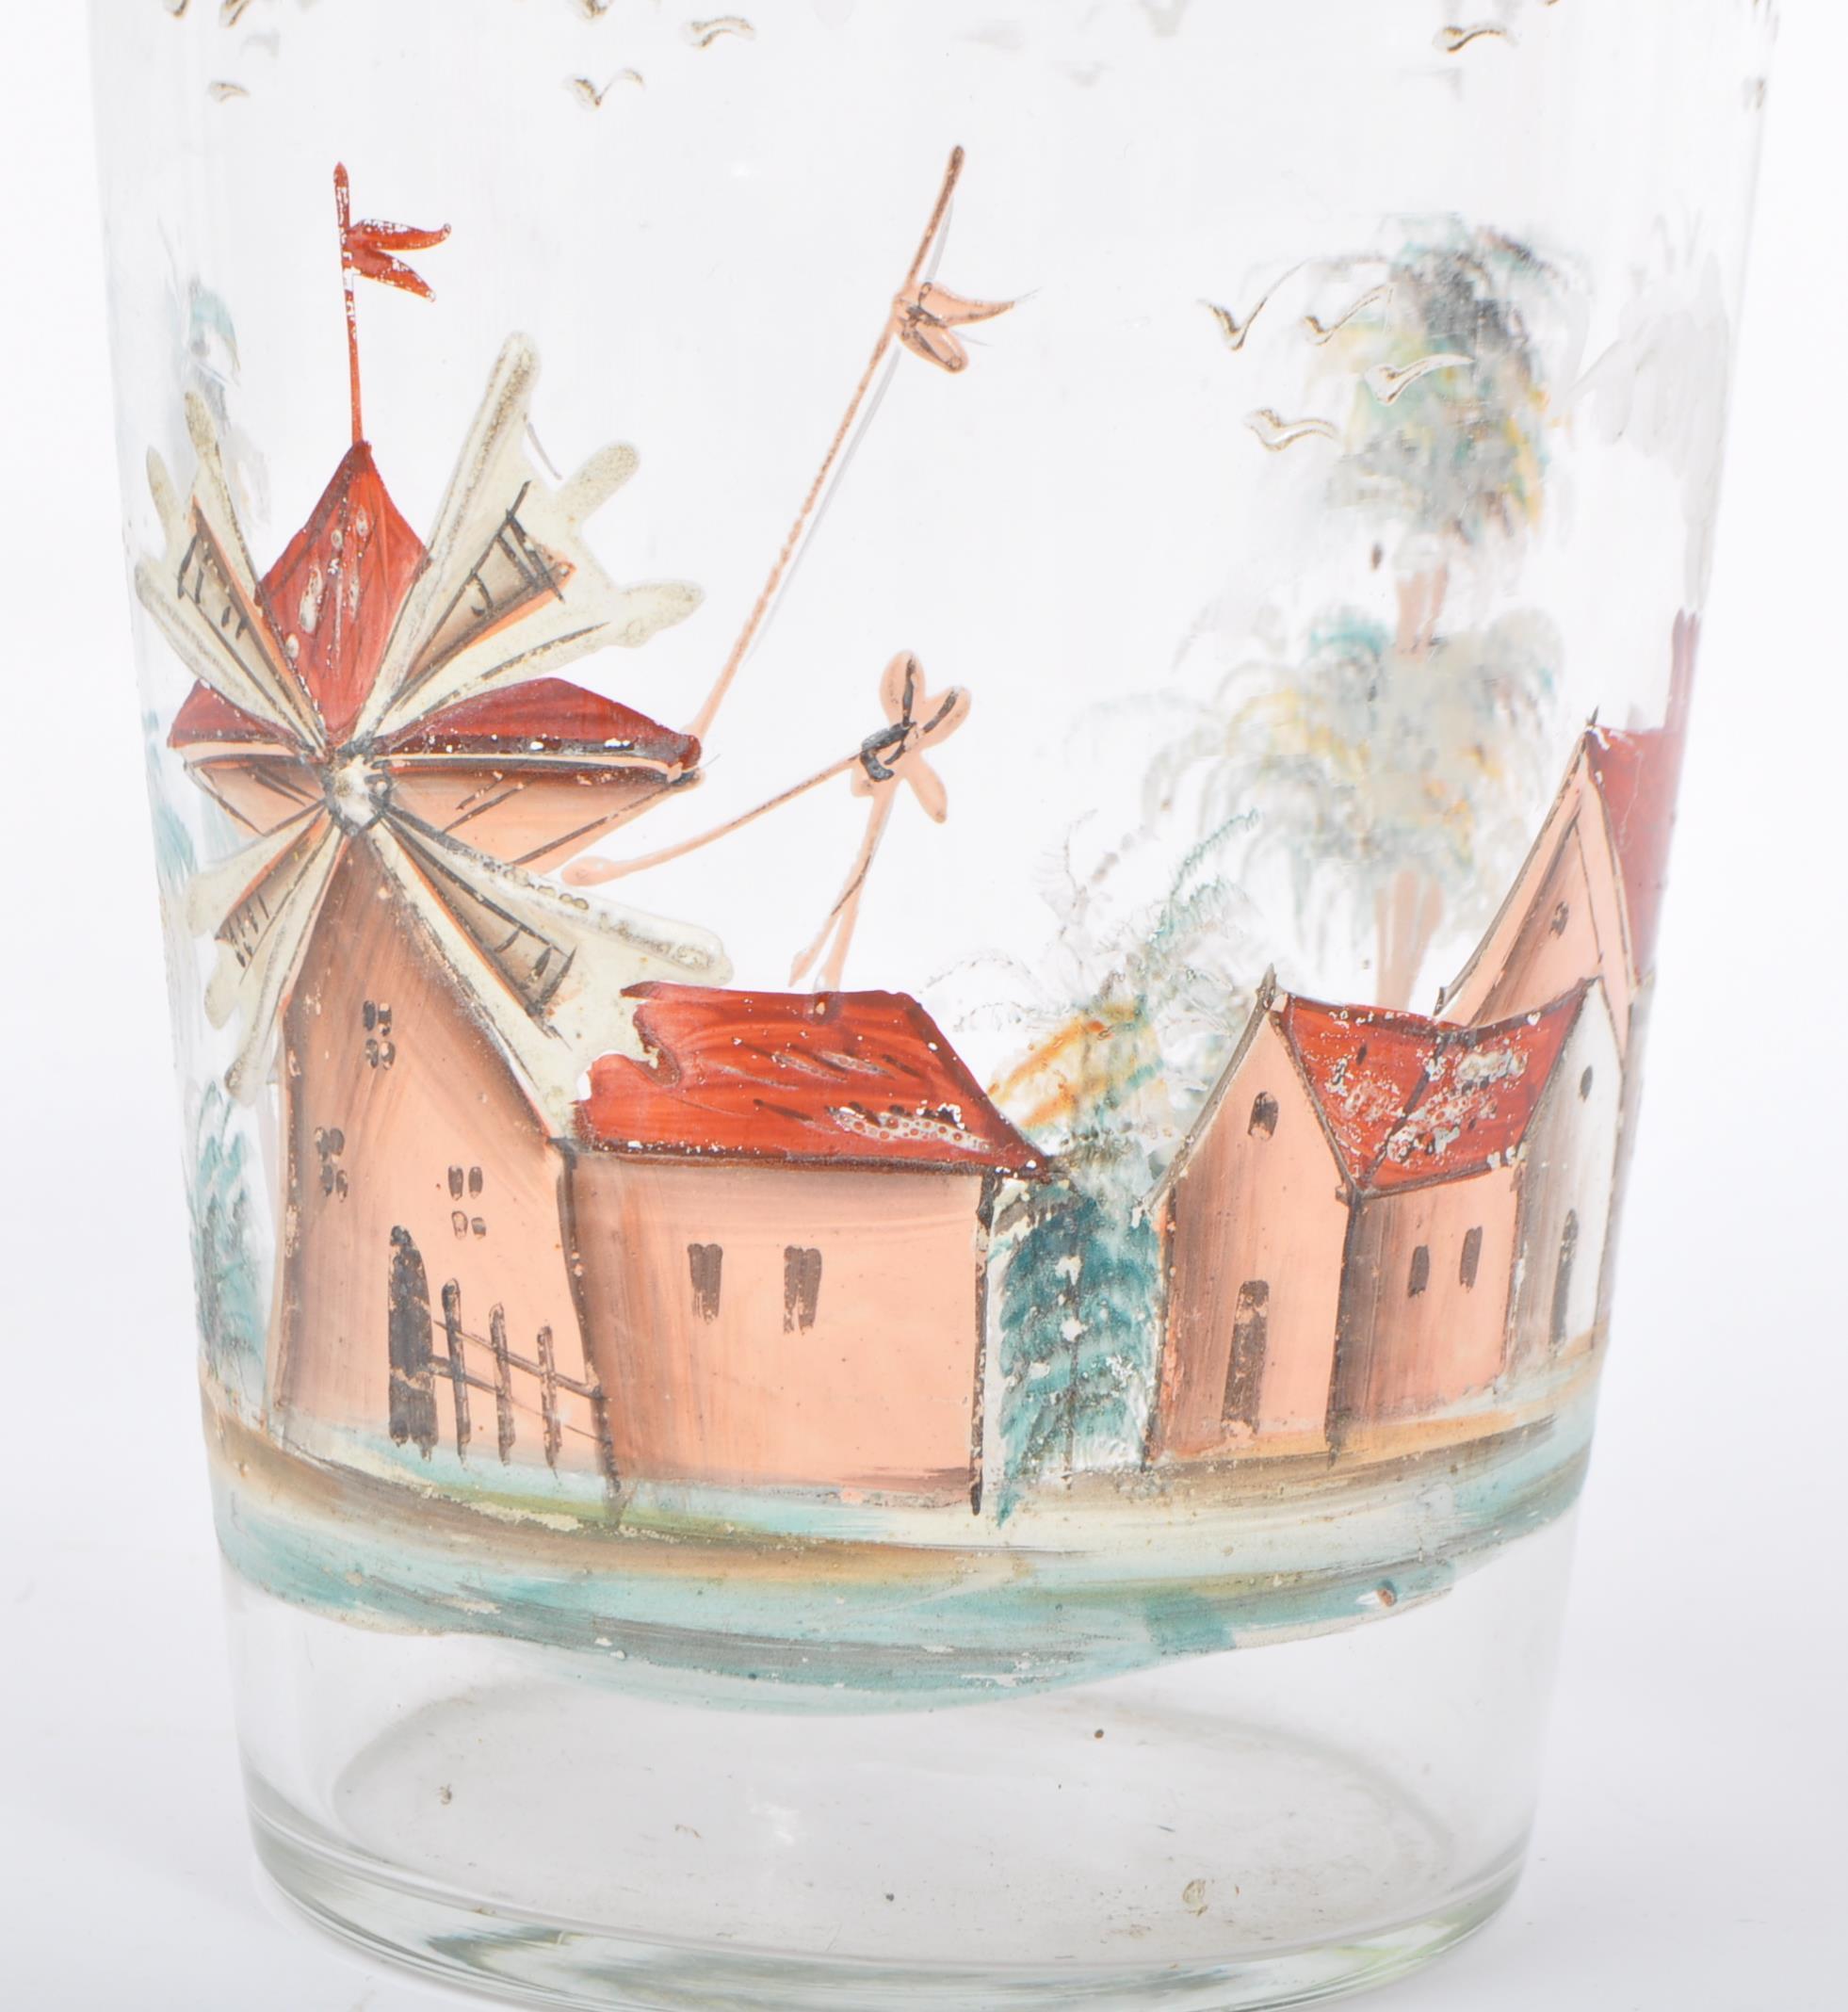 19TH CENTURY PAINTED GLASS BEAKER WITH DECANTERS - Image 5 of 5